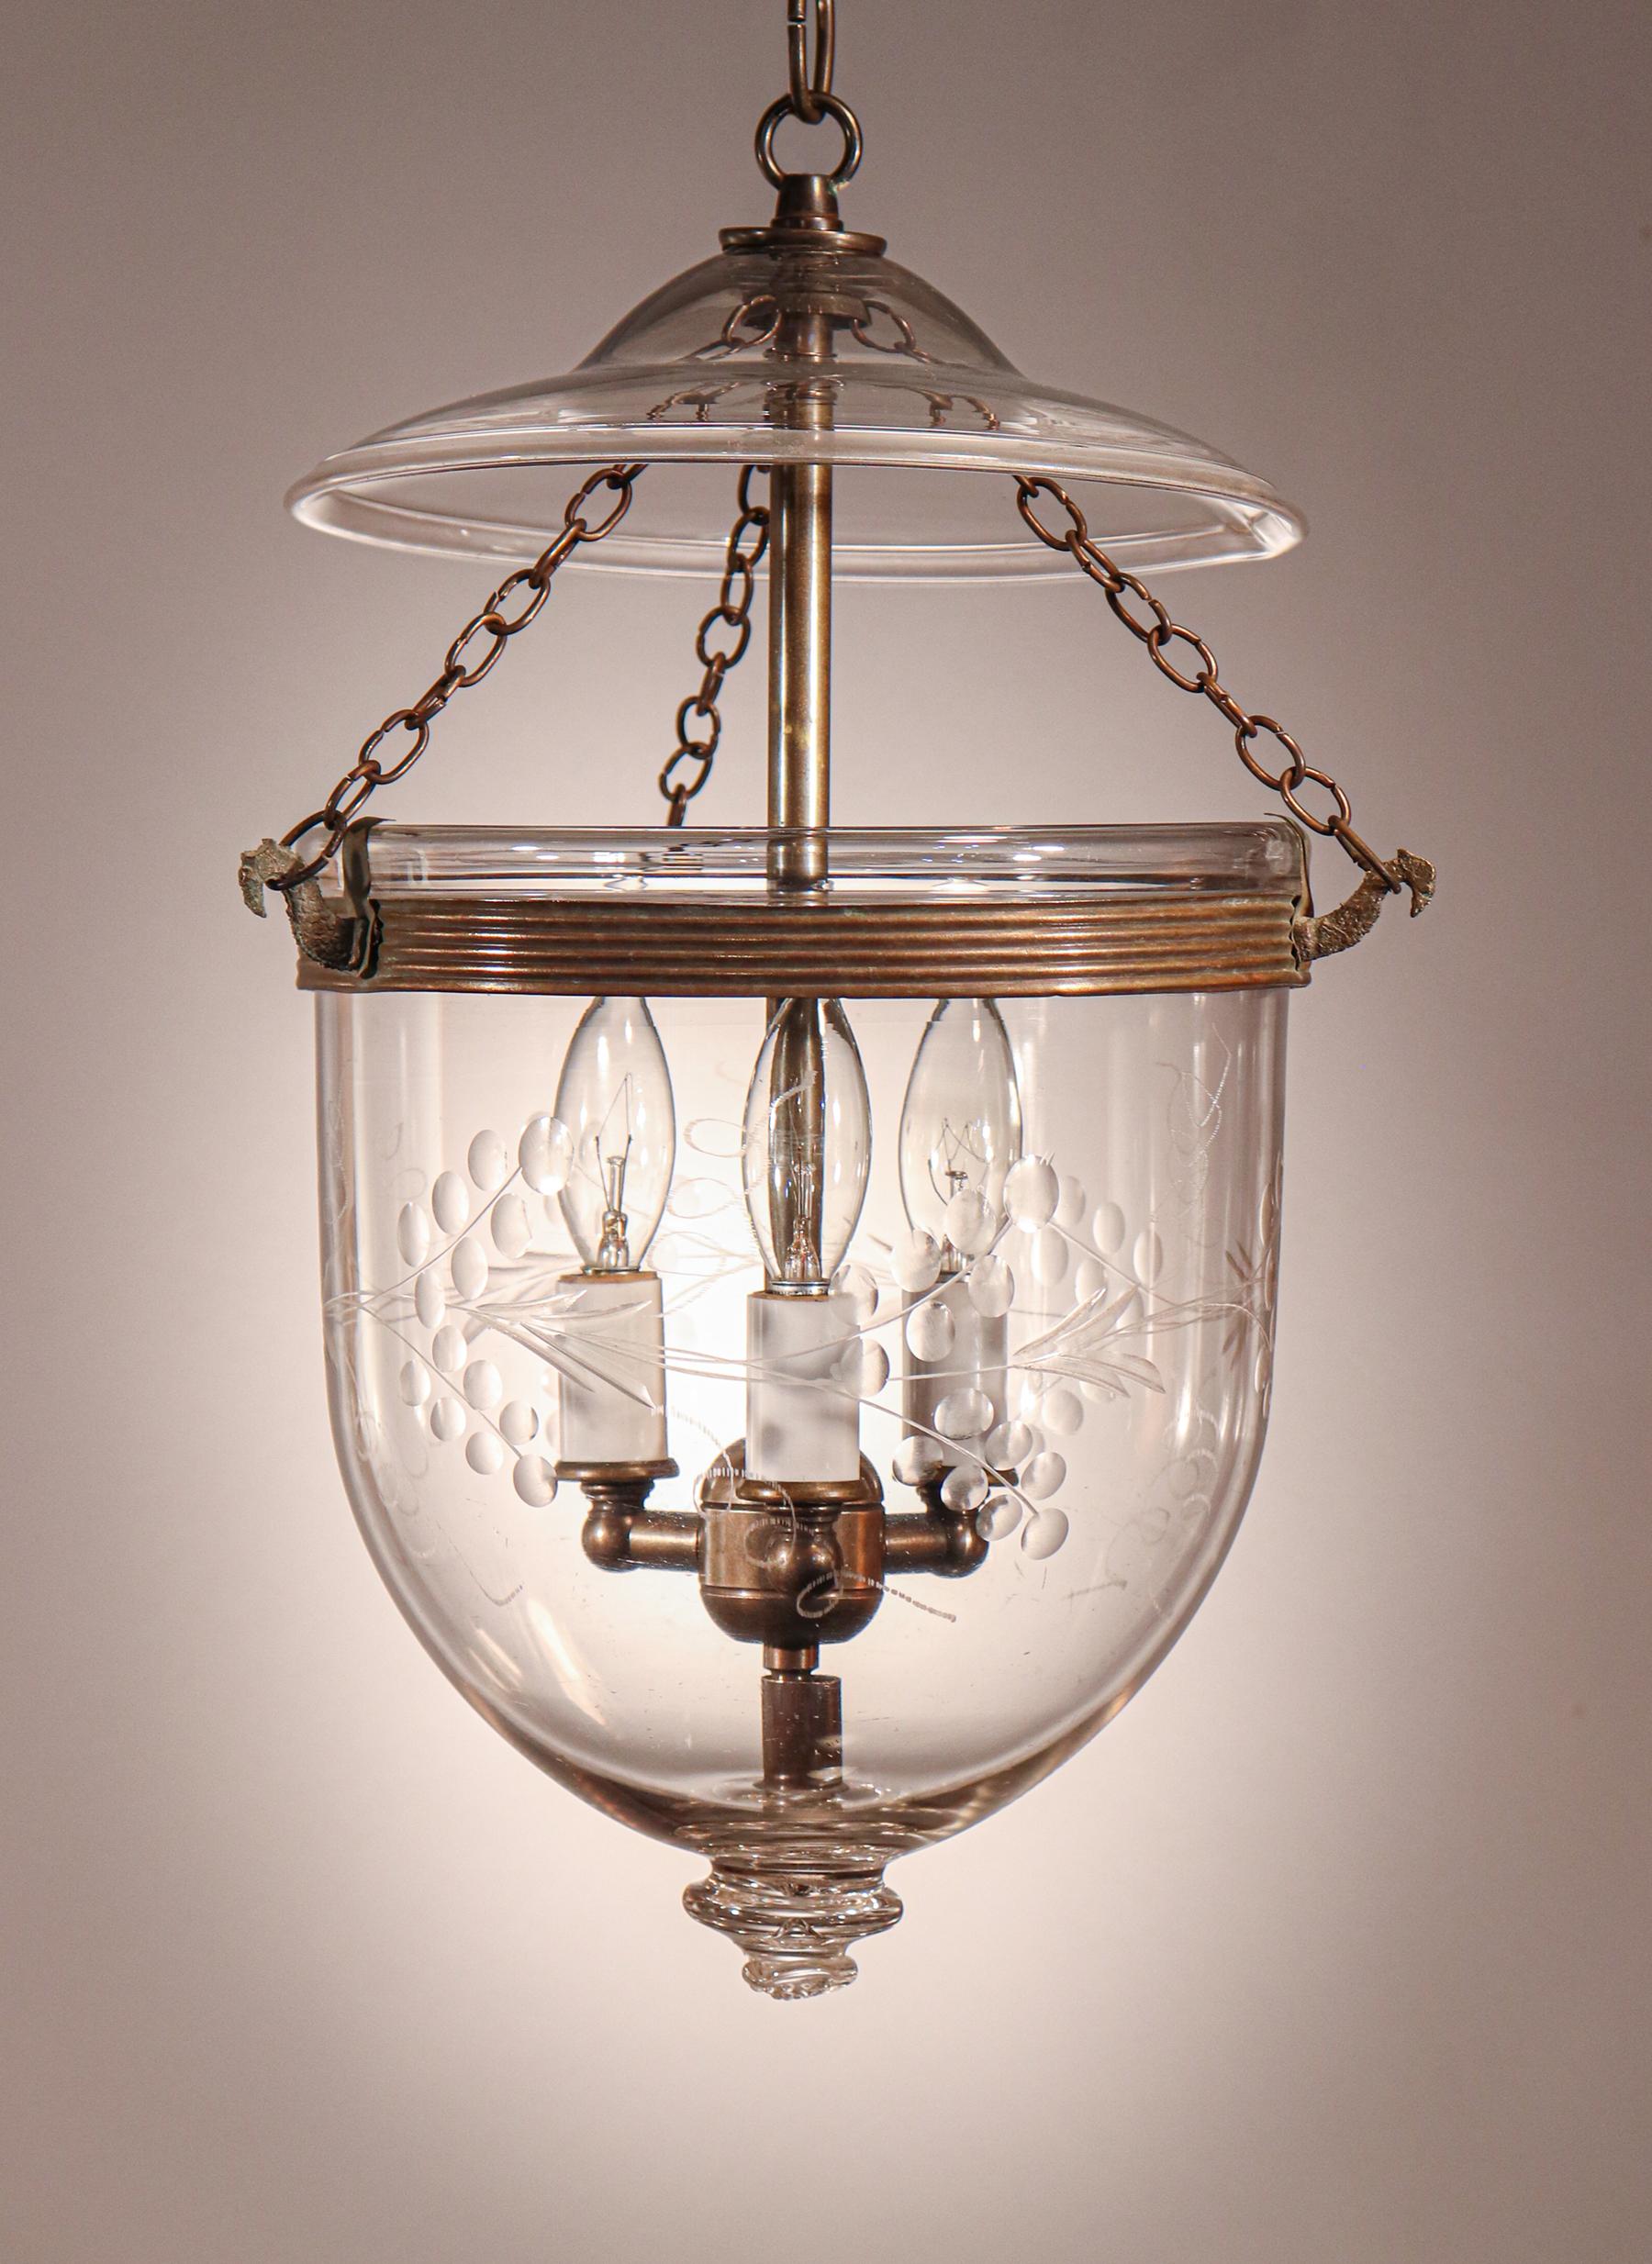 An English hand blown glass bell jar lantern with lovely form and an etched vine motif. This circa 1880 petite pendant light features its original rolled brass band and glass smoke bell/lid. The fixture has been newly electrified with a three-bulb